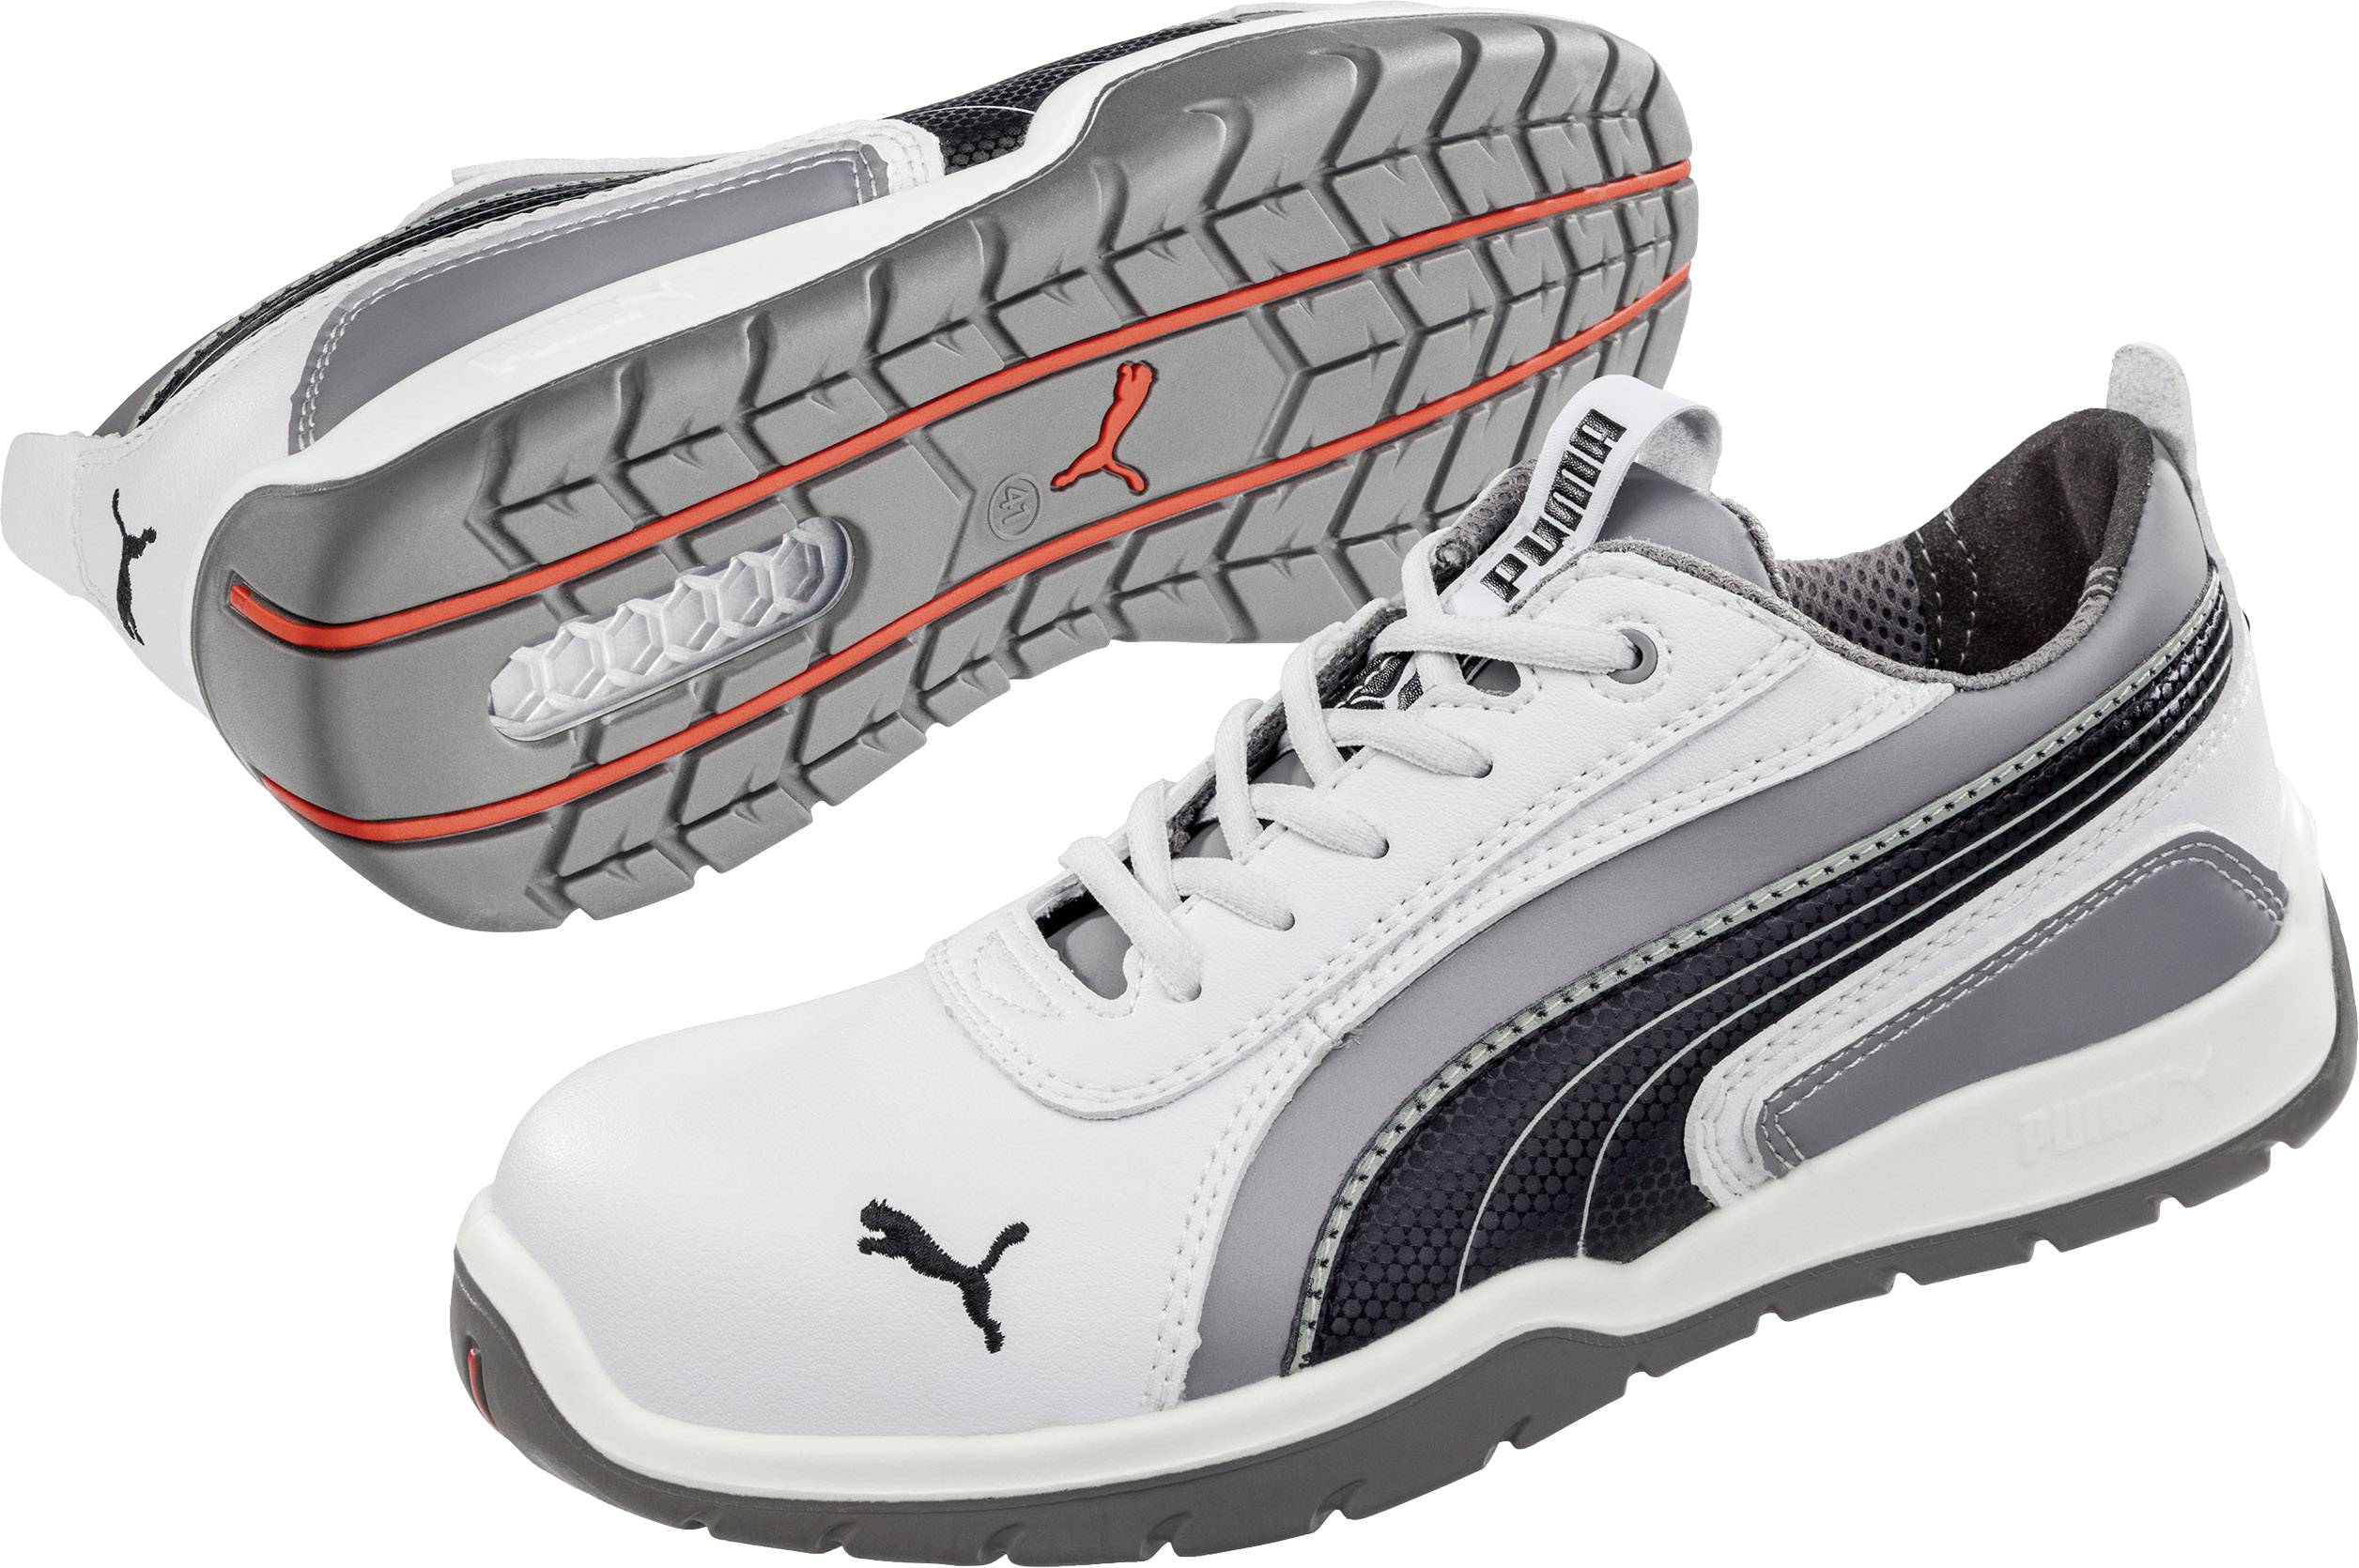 PUMA Safety Monaco Low 642650-39 Protective footwear S3 Size: 39 White, Grey 1 Pair